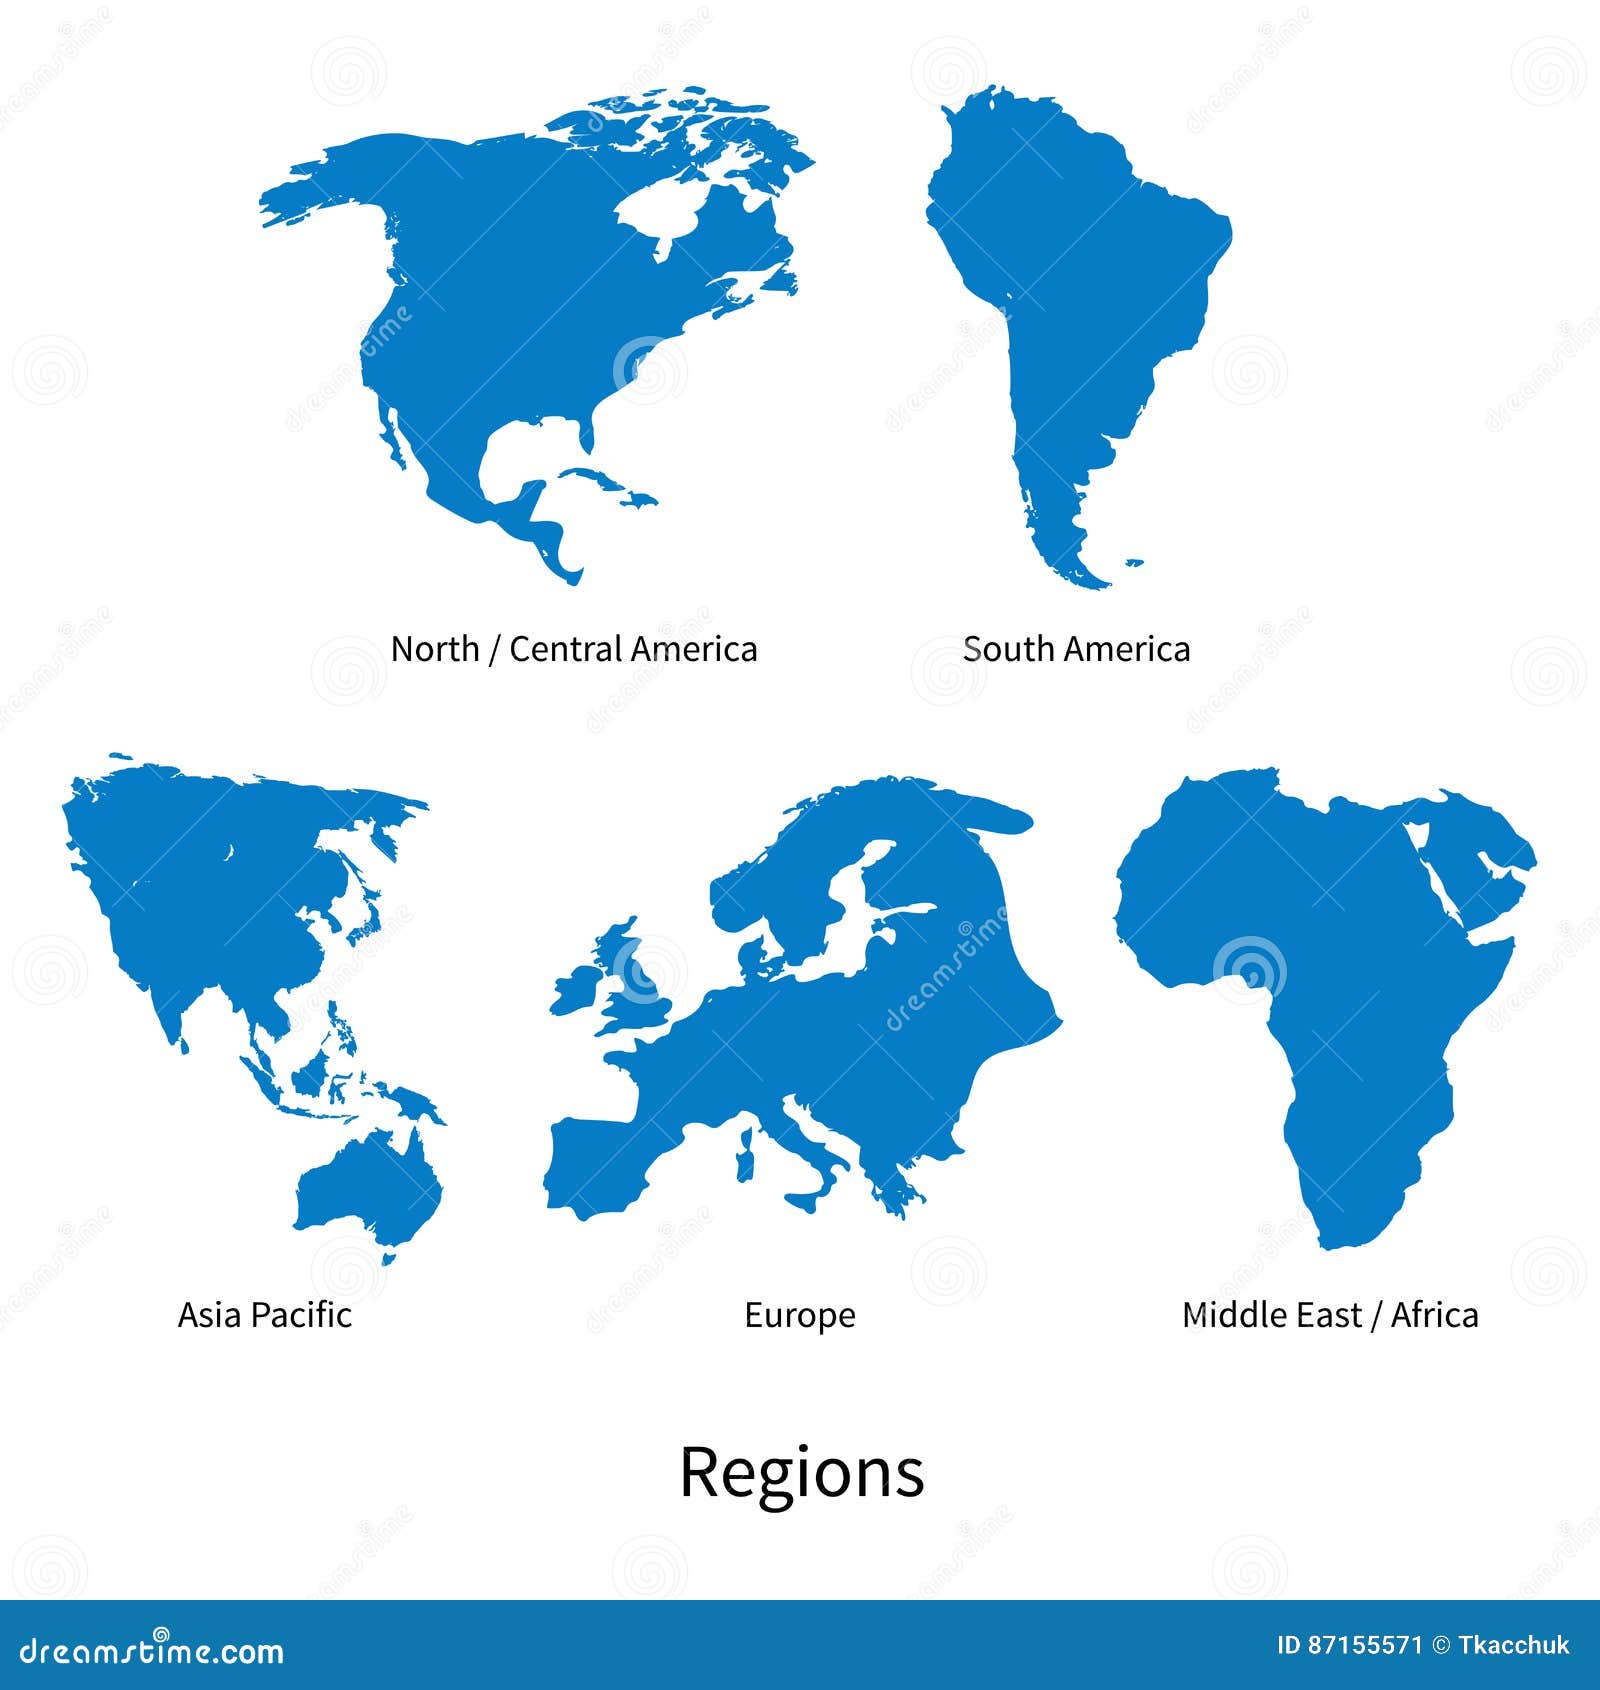 detailed  map of north - central america, asia pacific, europe, south america, middle and east africa regions